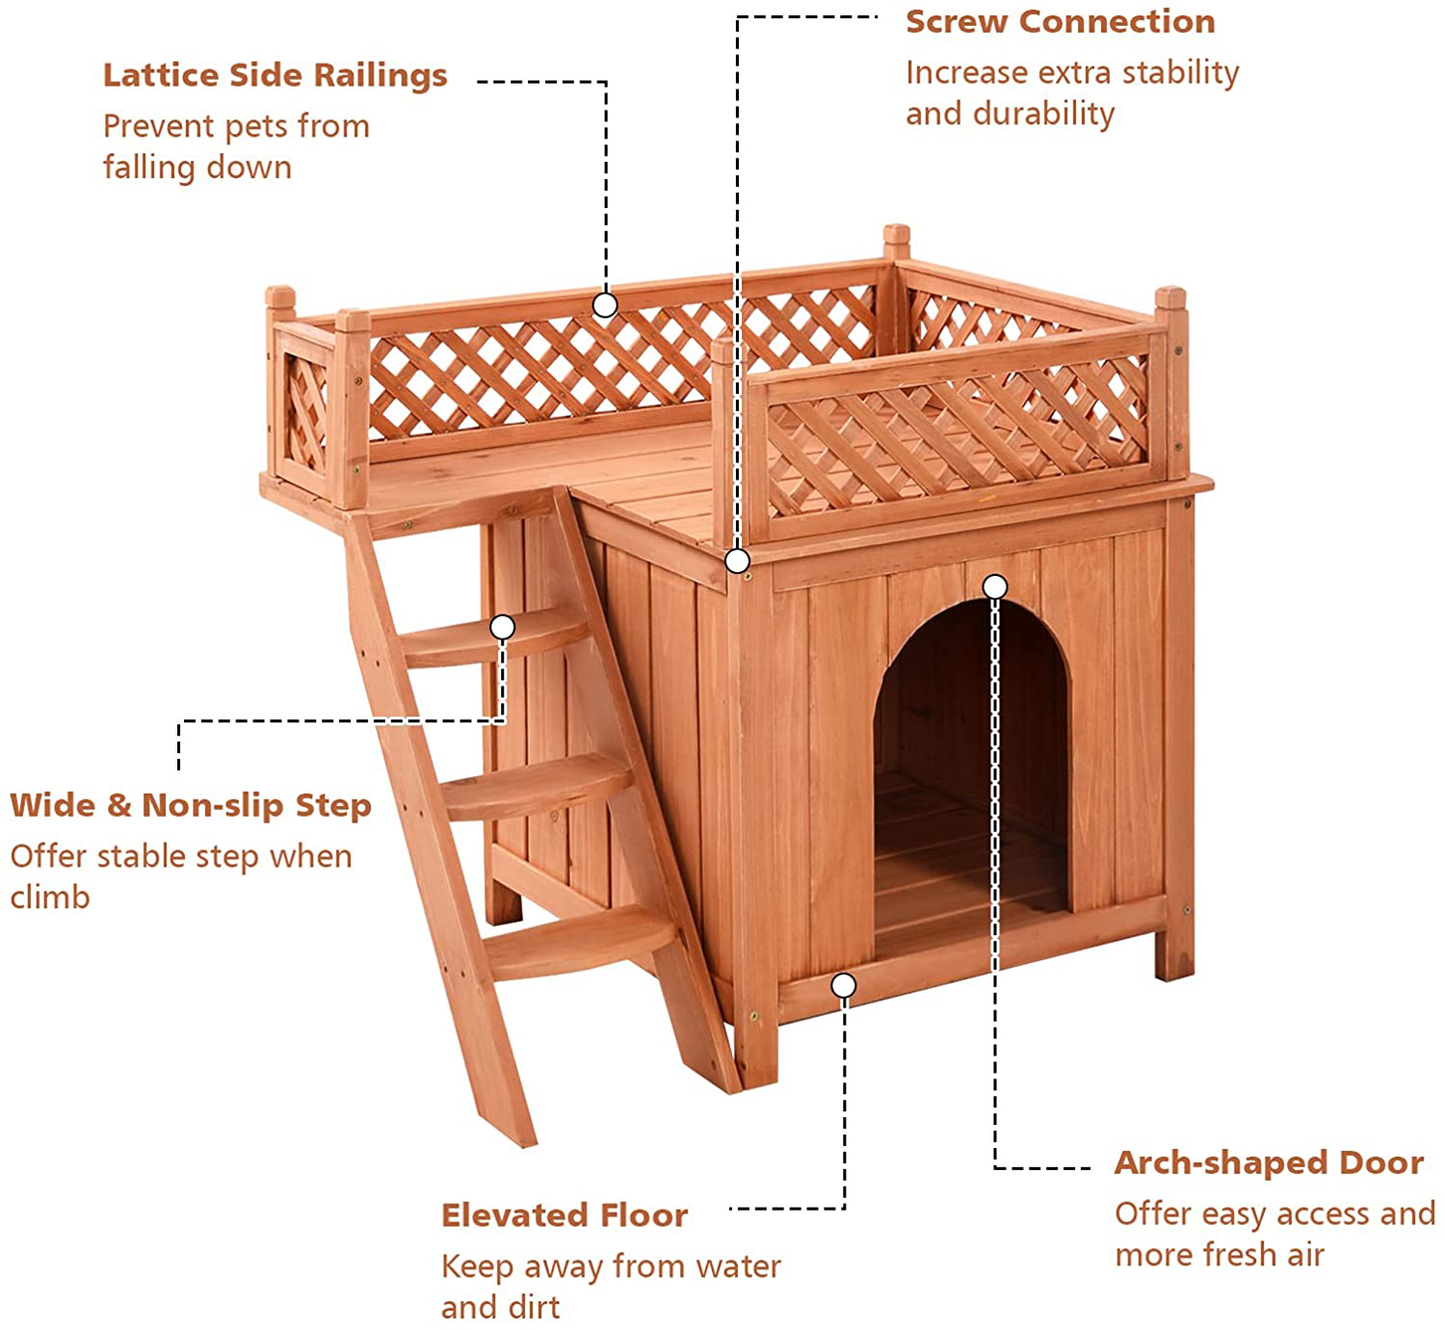 Giantex Pet Dog House, Wooden Dog Room Shelter with Stairs, Raised Roof and Balcony Bed for Indoor and Outdoor Use, Wood Dog House Animals & Pet Supplies > Pet Supplies > Dog Supplies > Dog Houses Giantex   